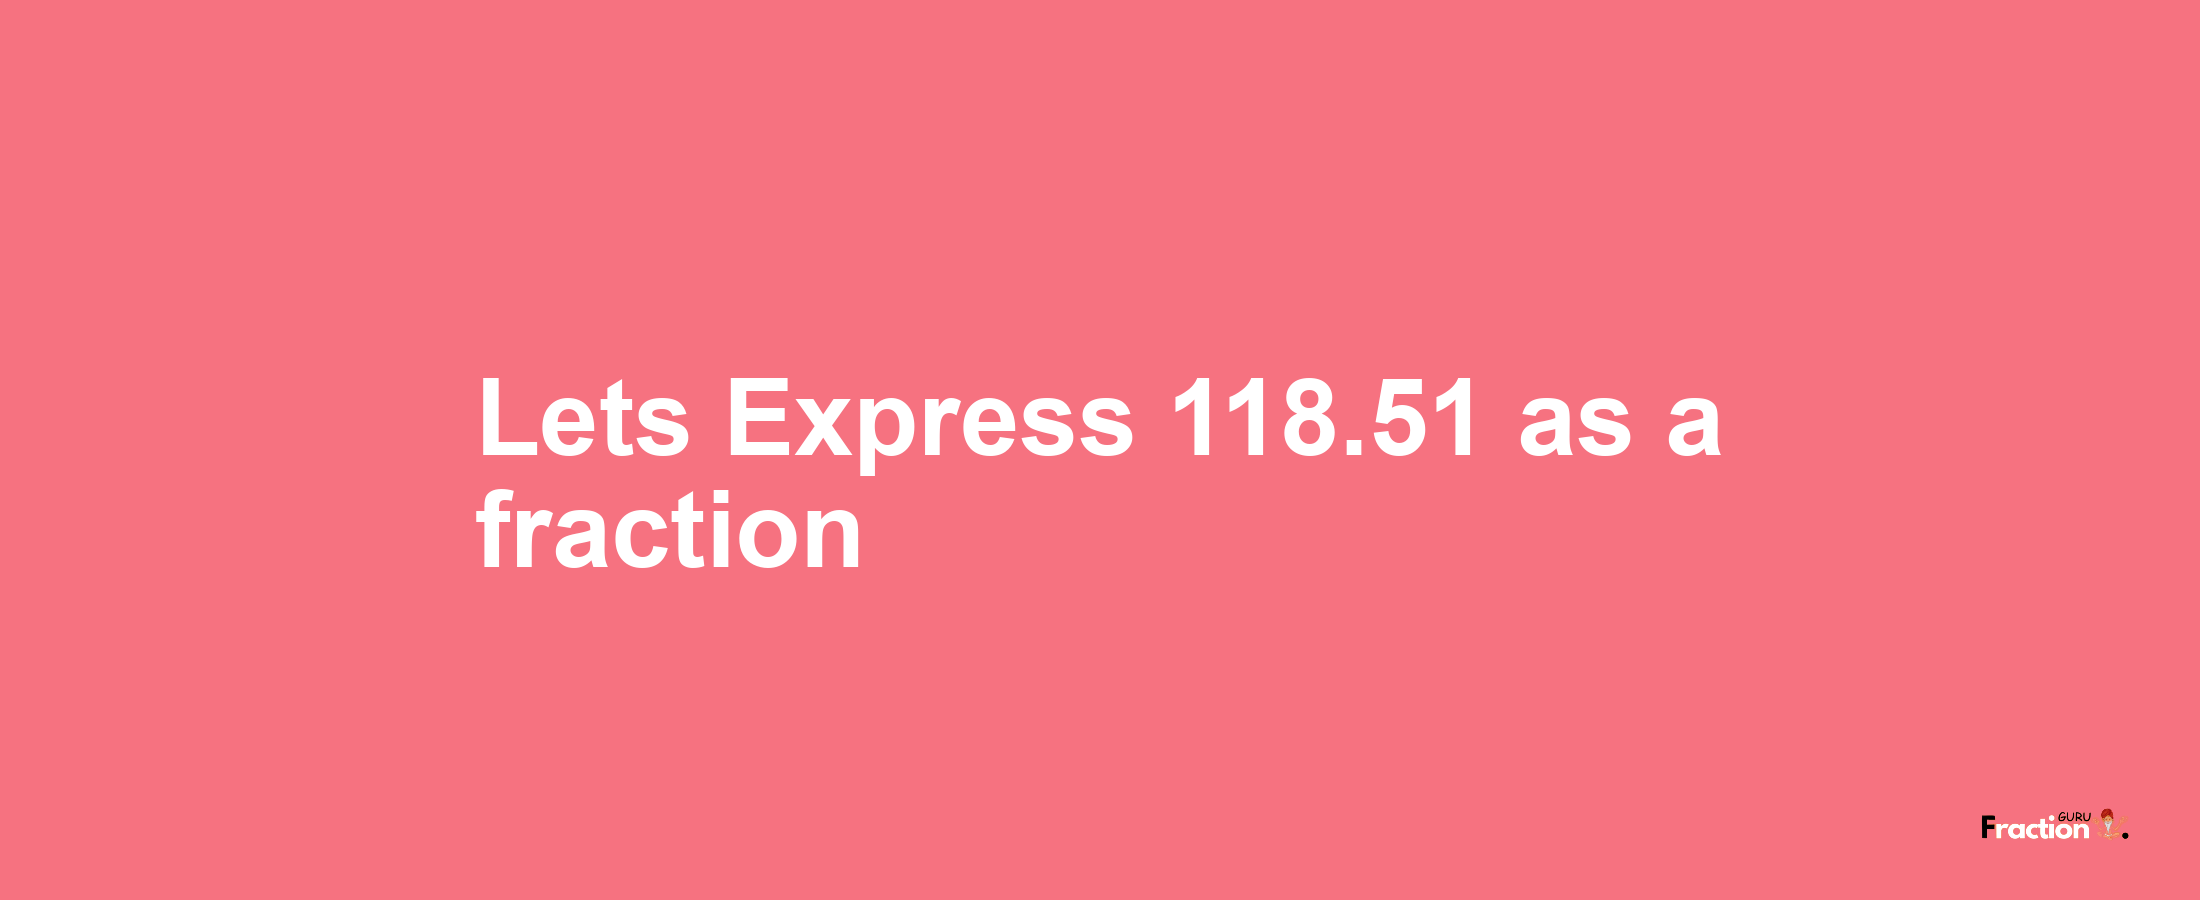 Lets Express 118.51 as afraction